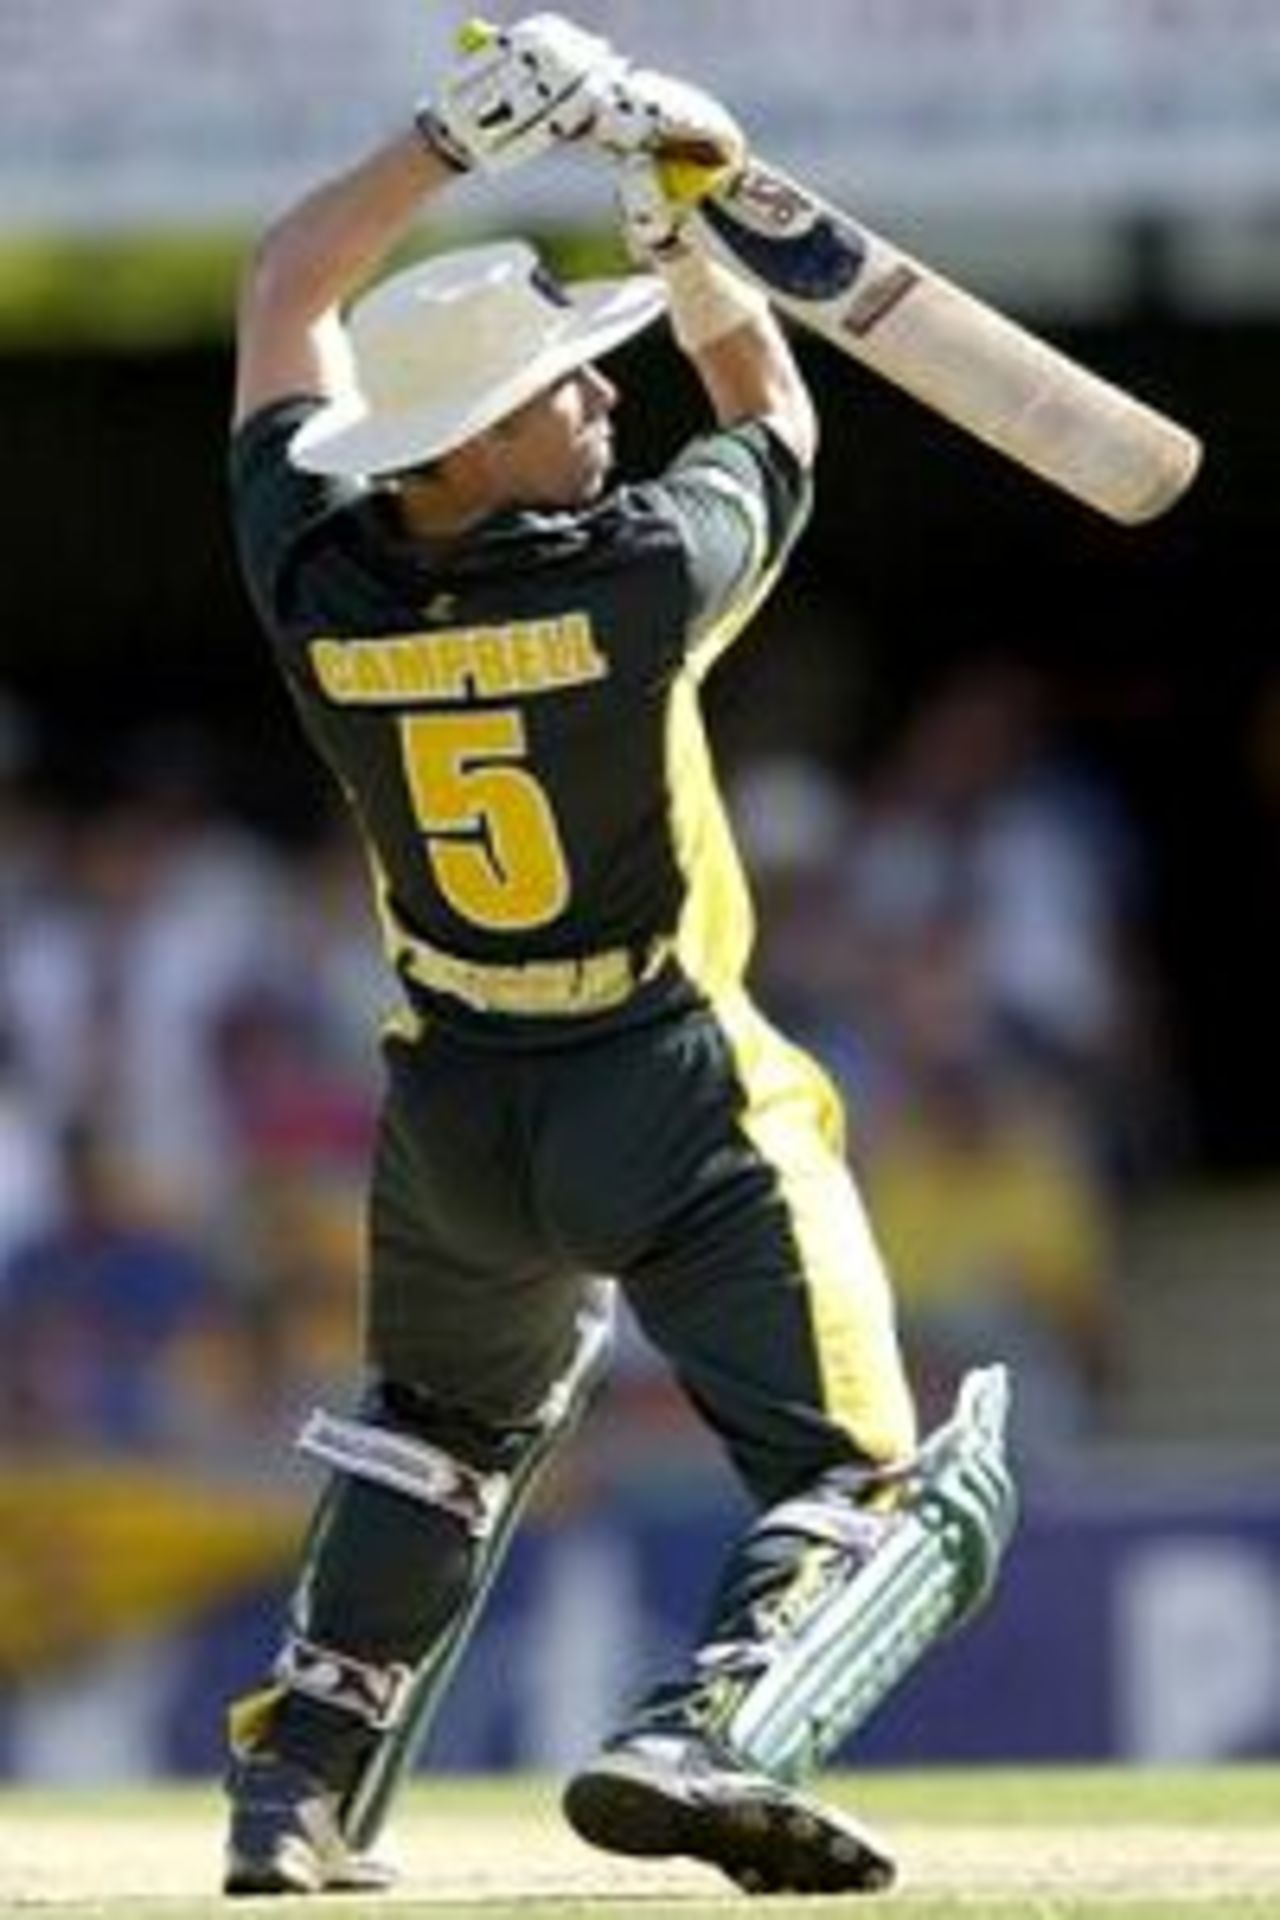 8 Jan 2002: Ryan Campbell of Australia A in action against New Zealand during the Australia A versus New Zealand one day cricket match played at the Gabba in Brisbane, Australia.